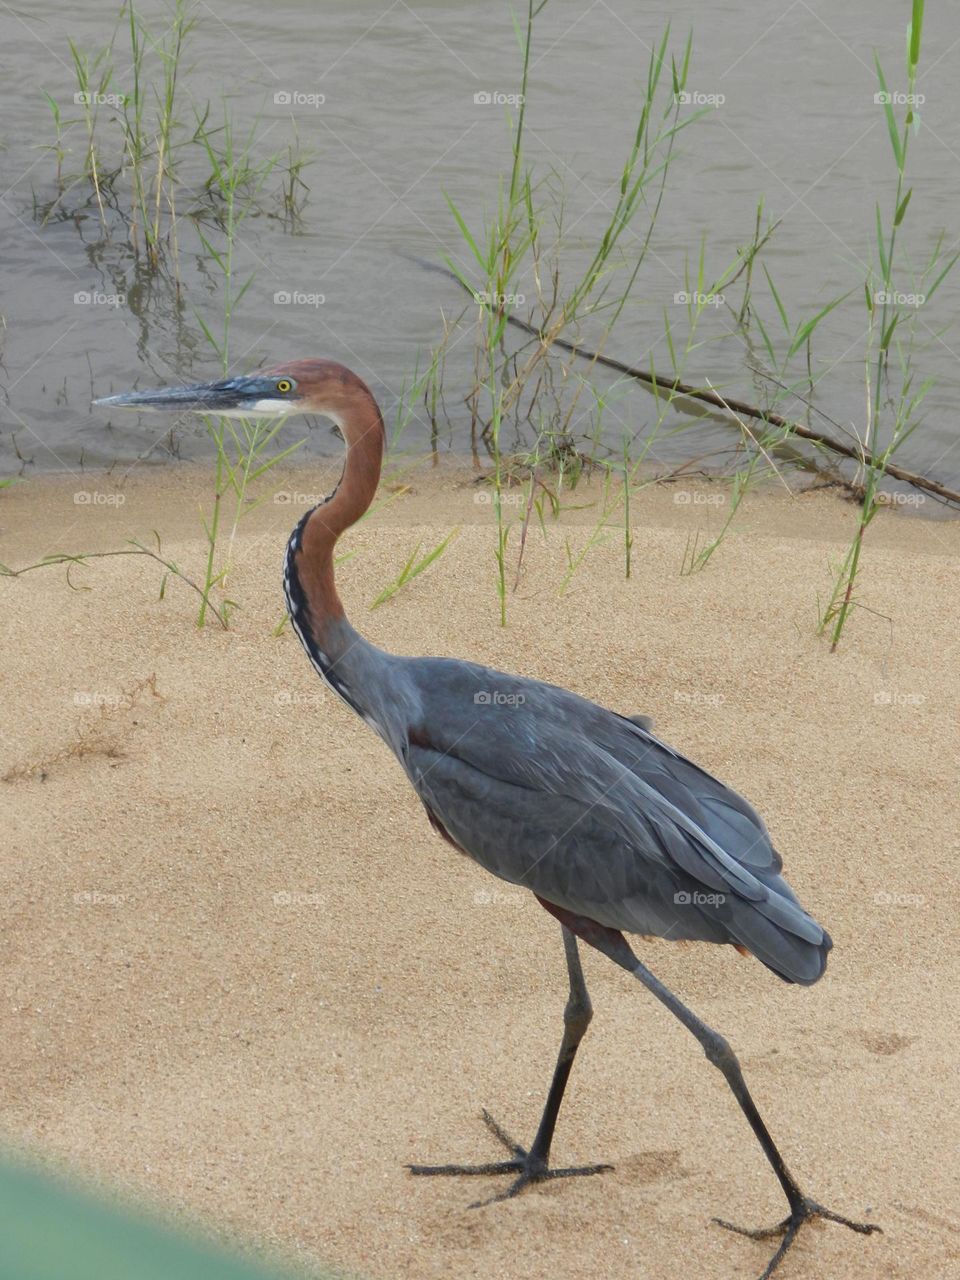 Red-collared giant heron on the beach near the waterfront in Africa